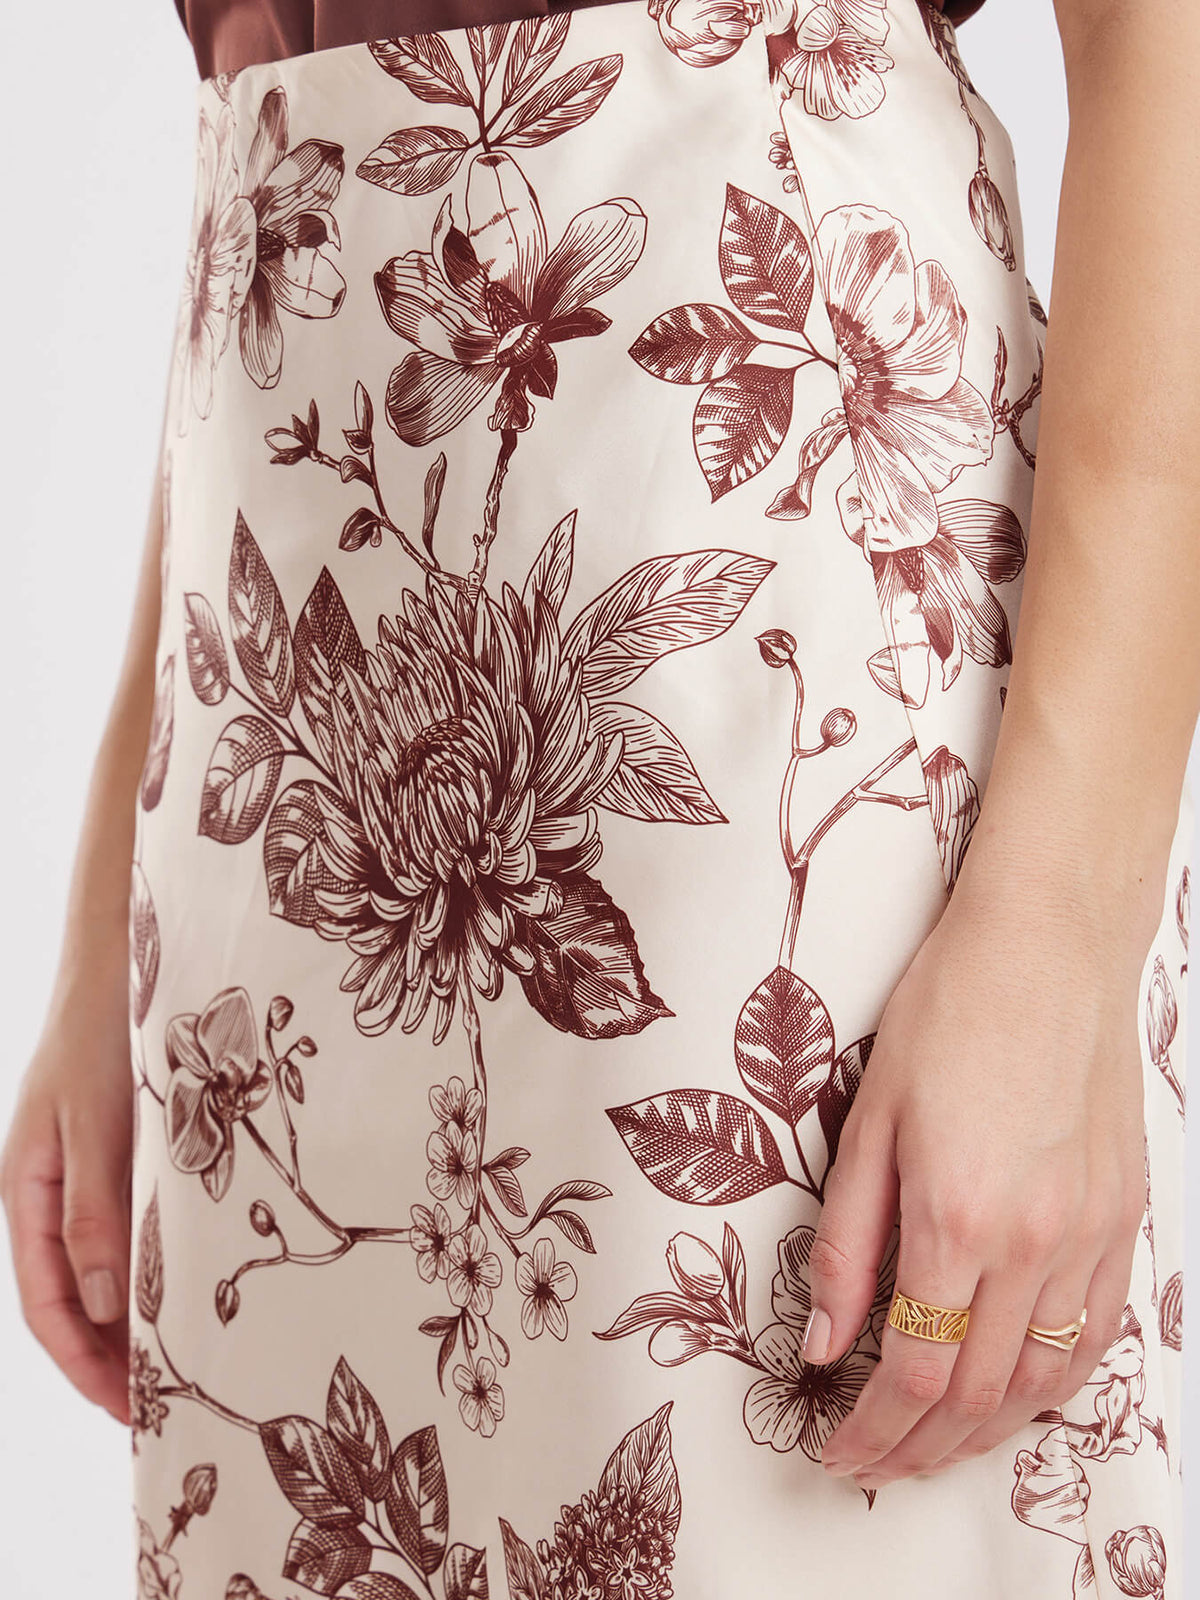 Satin Floral Skirt - Beige And Brown